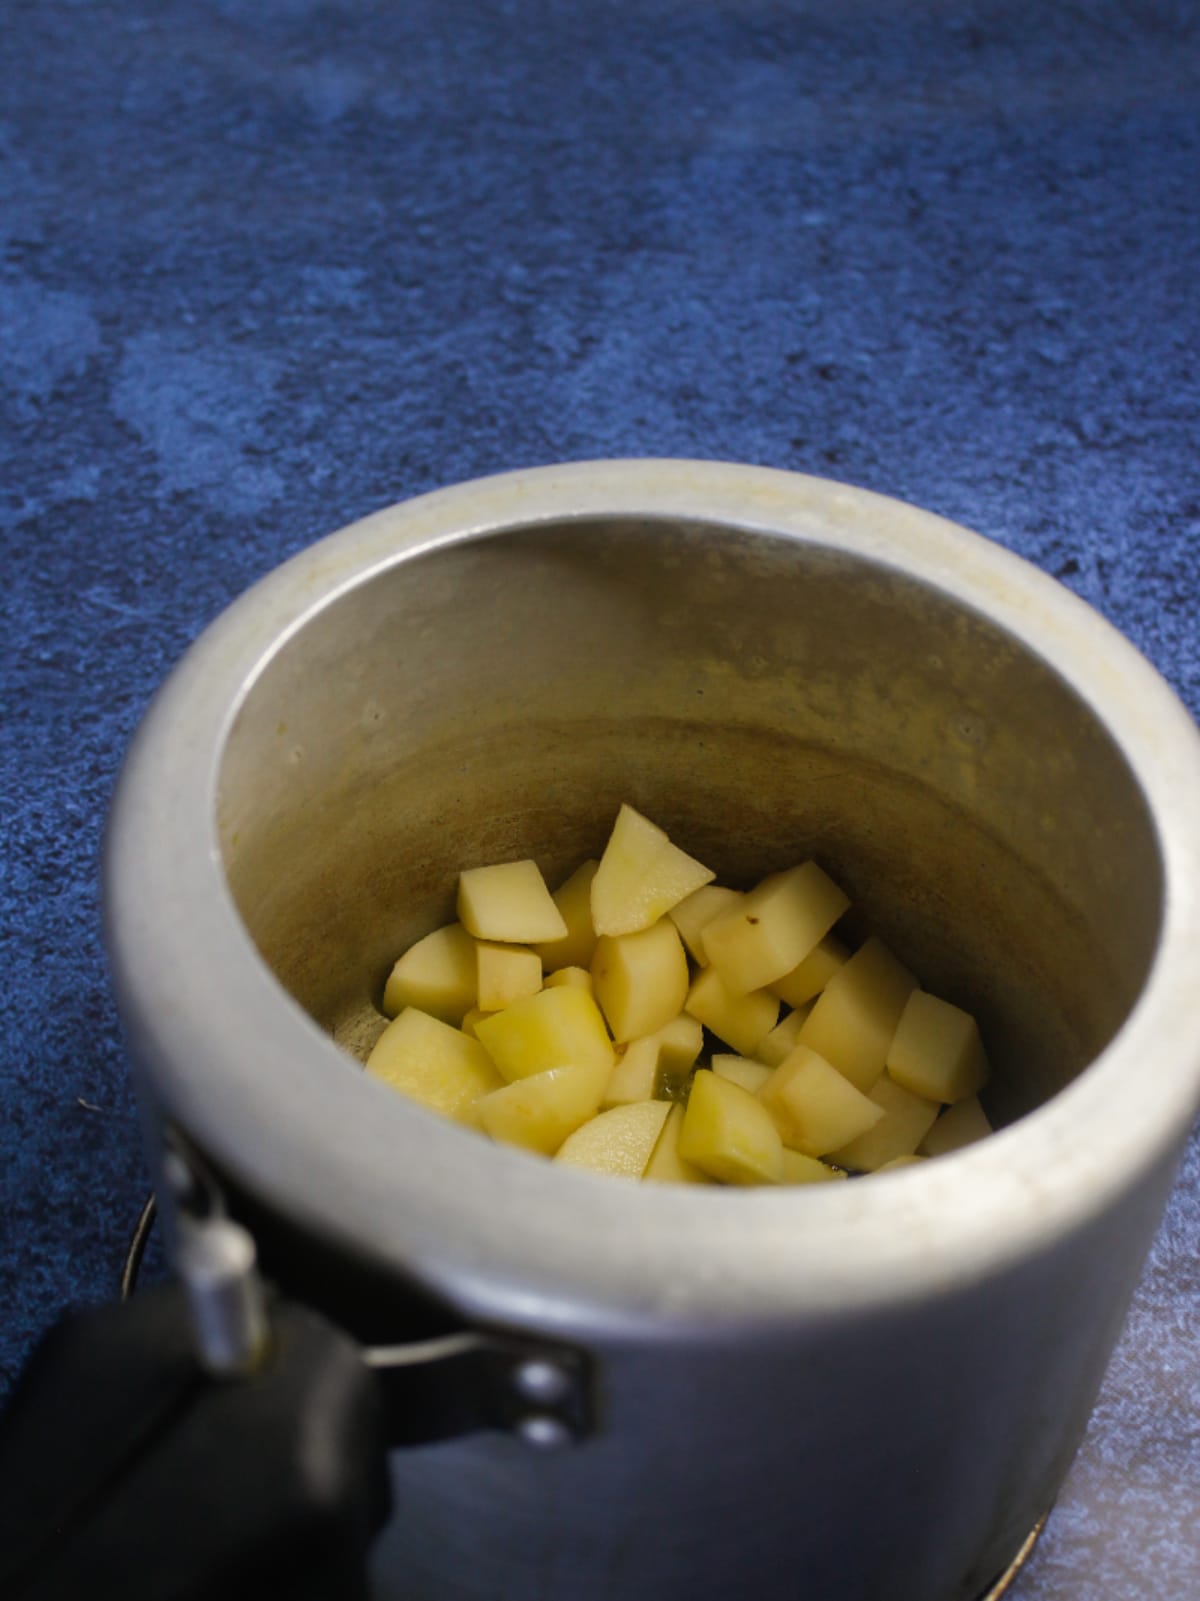 Now add cubed potatoes to the cooker